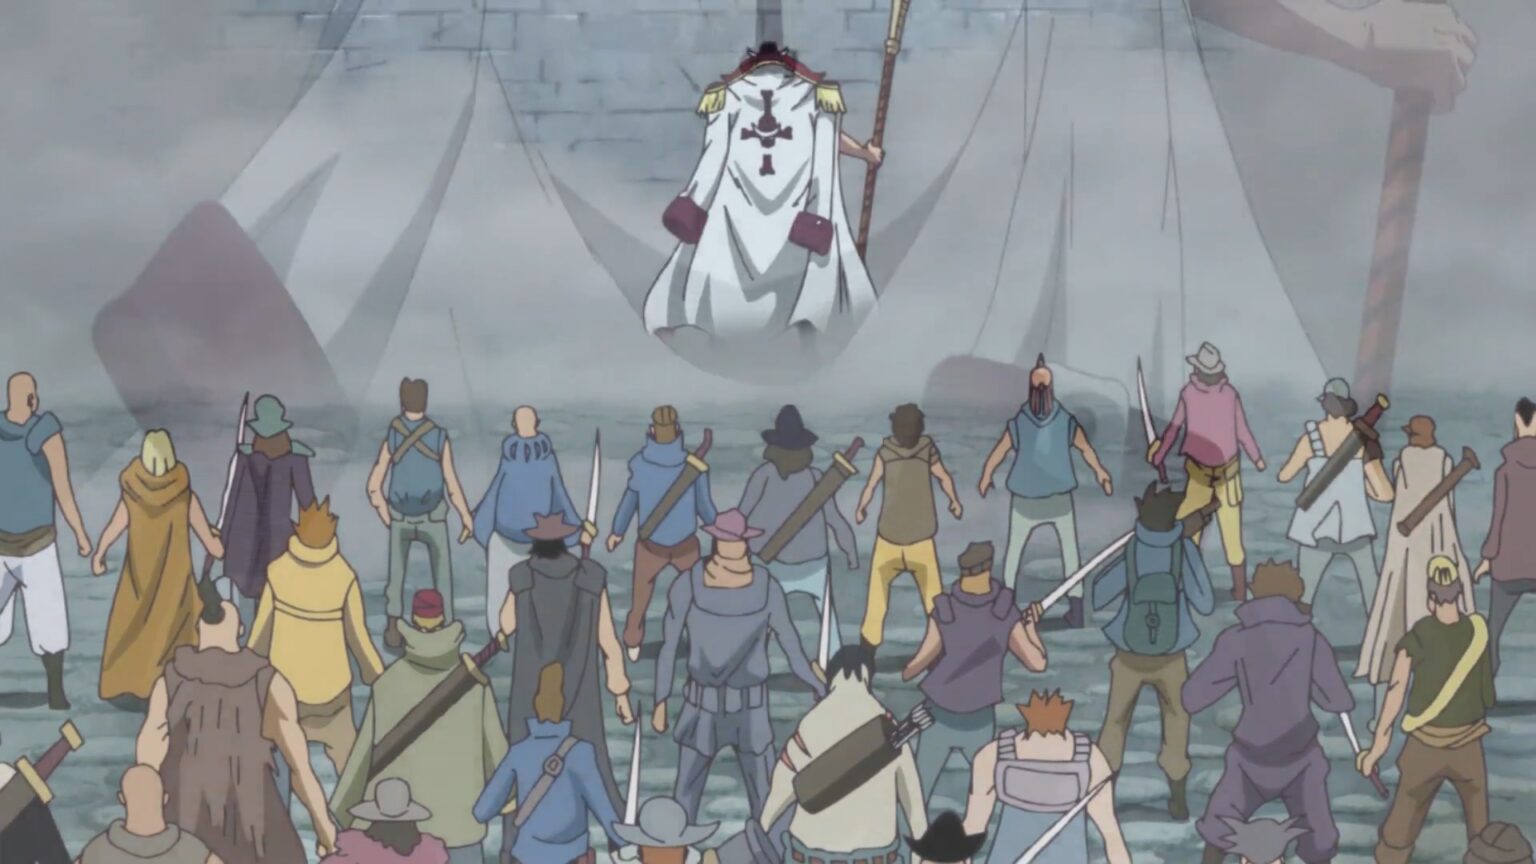 One Piece 890 Whitebeard Pirates were strong enough to fight against the entirety of Marine Forces.